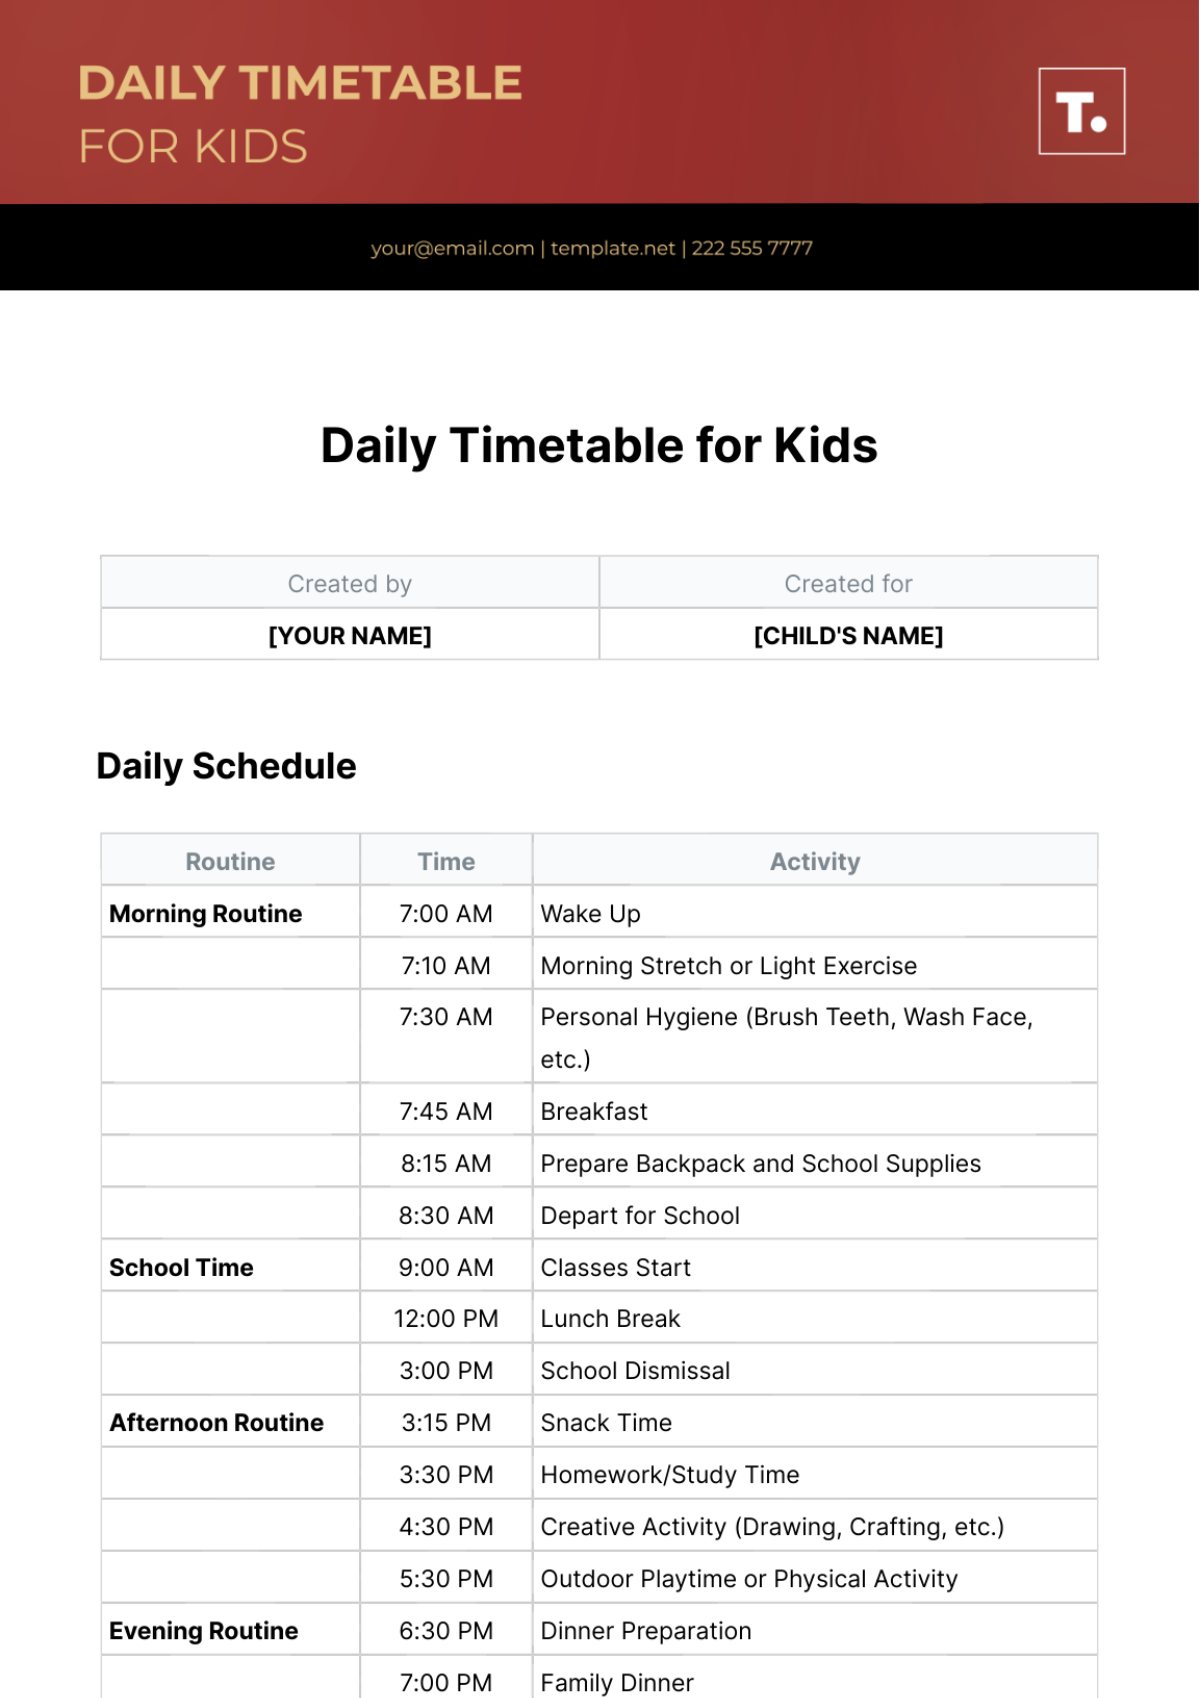 Daily Timetable Template for Kids